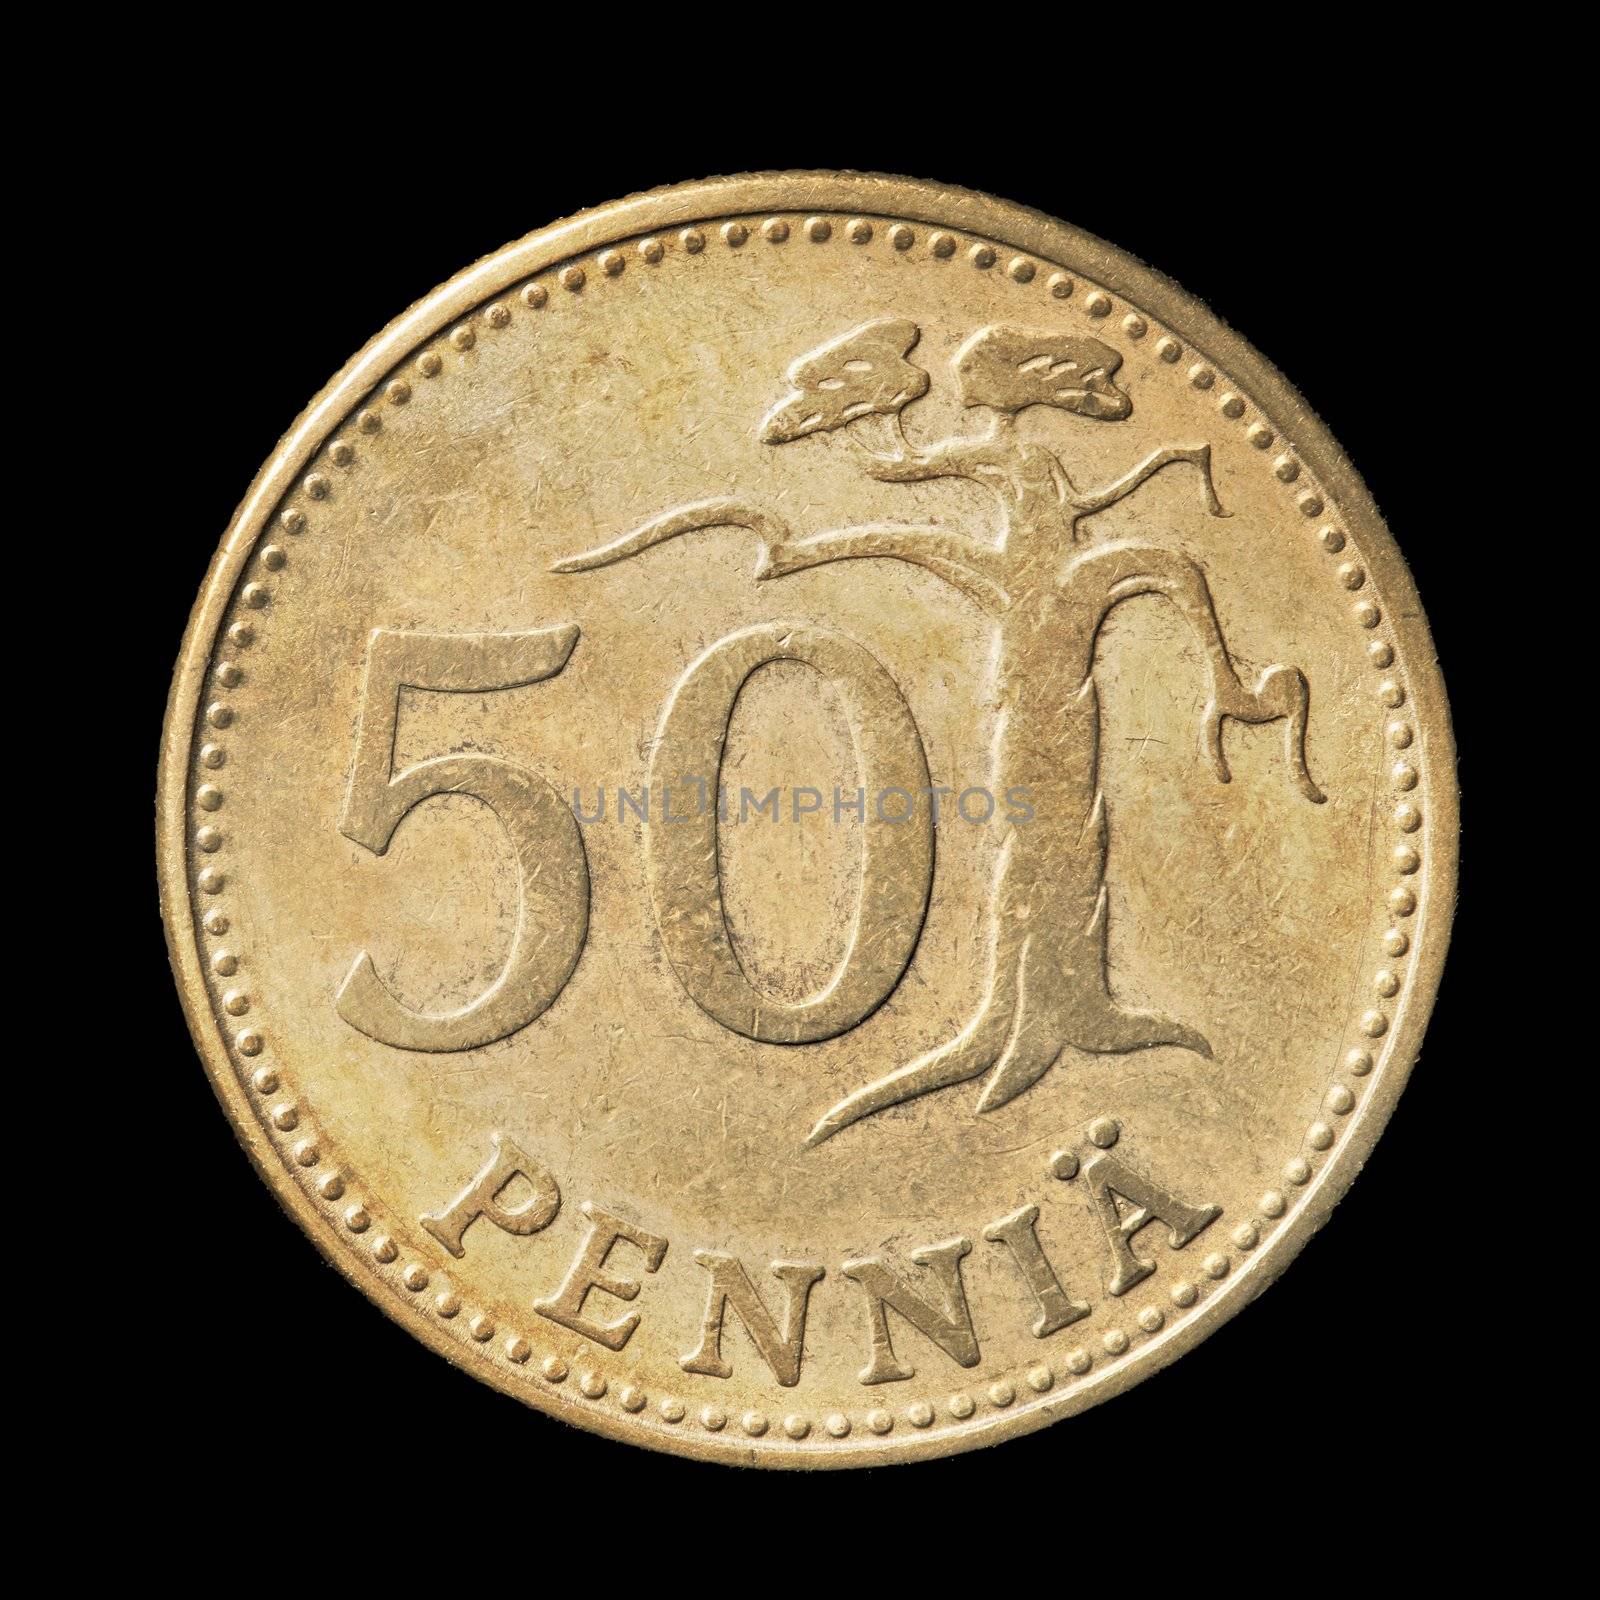 Fifty Penni by Stocksnapper